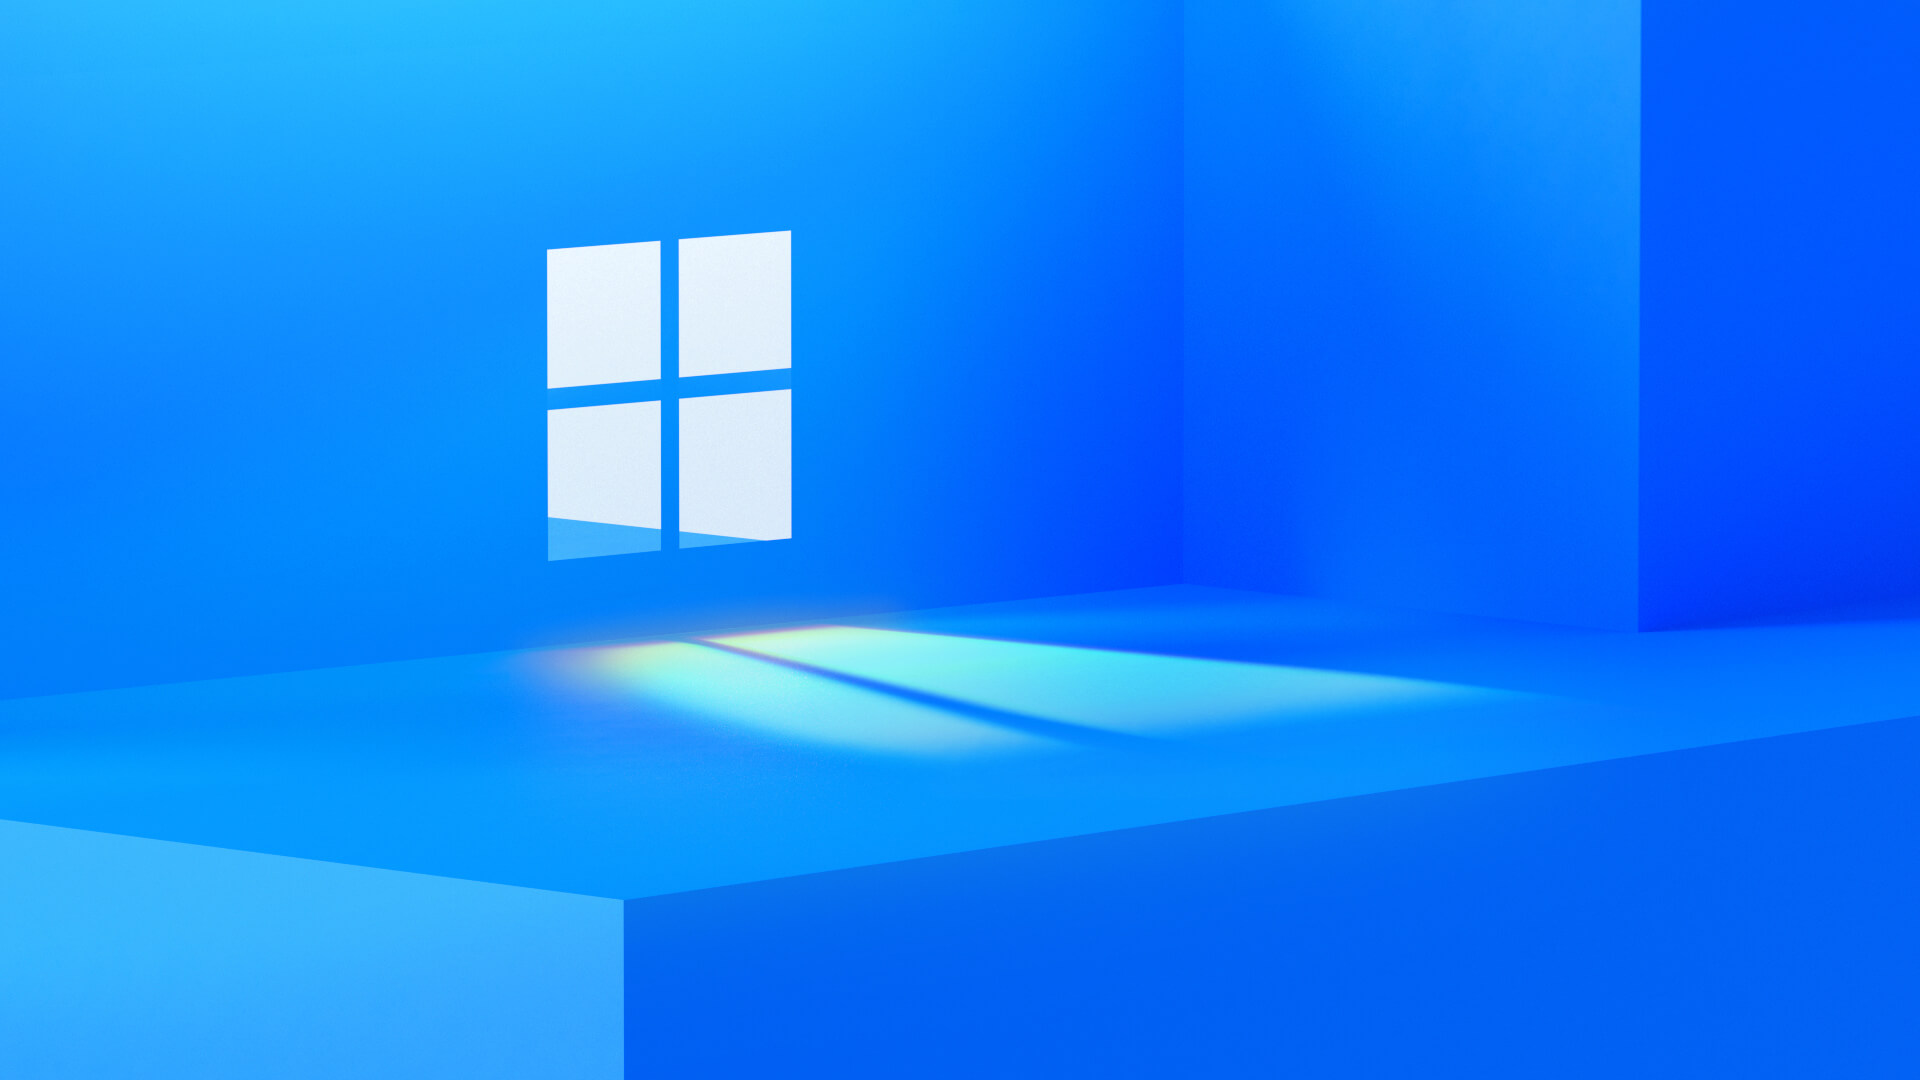 What's next for Windows by Microsoft | Wallpapers | WallpaperHub